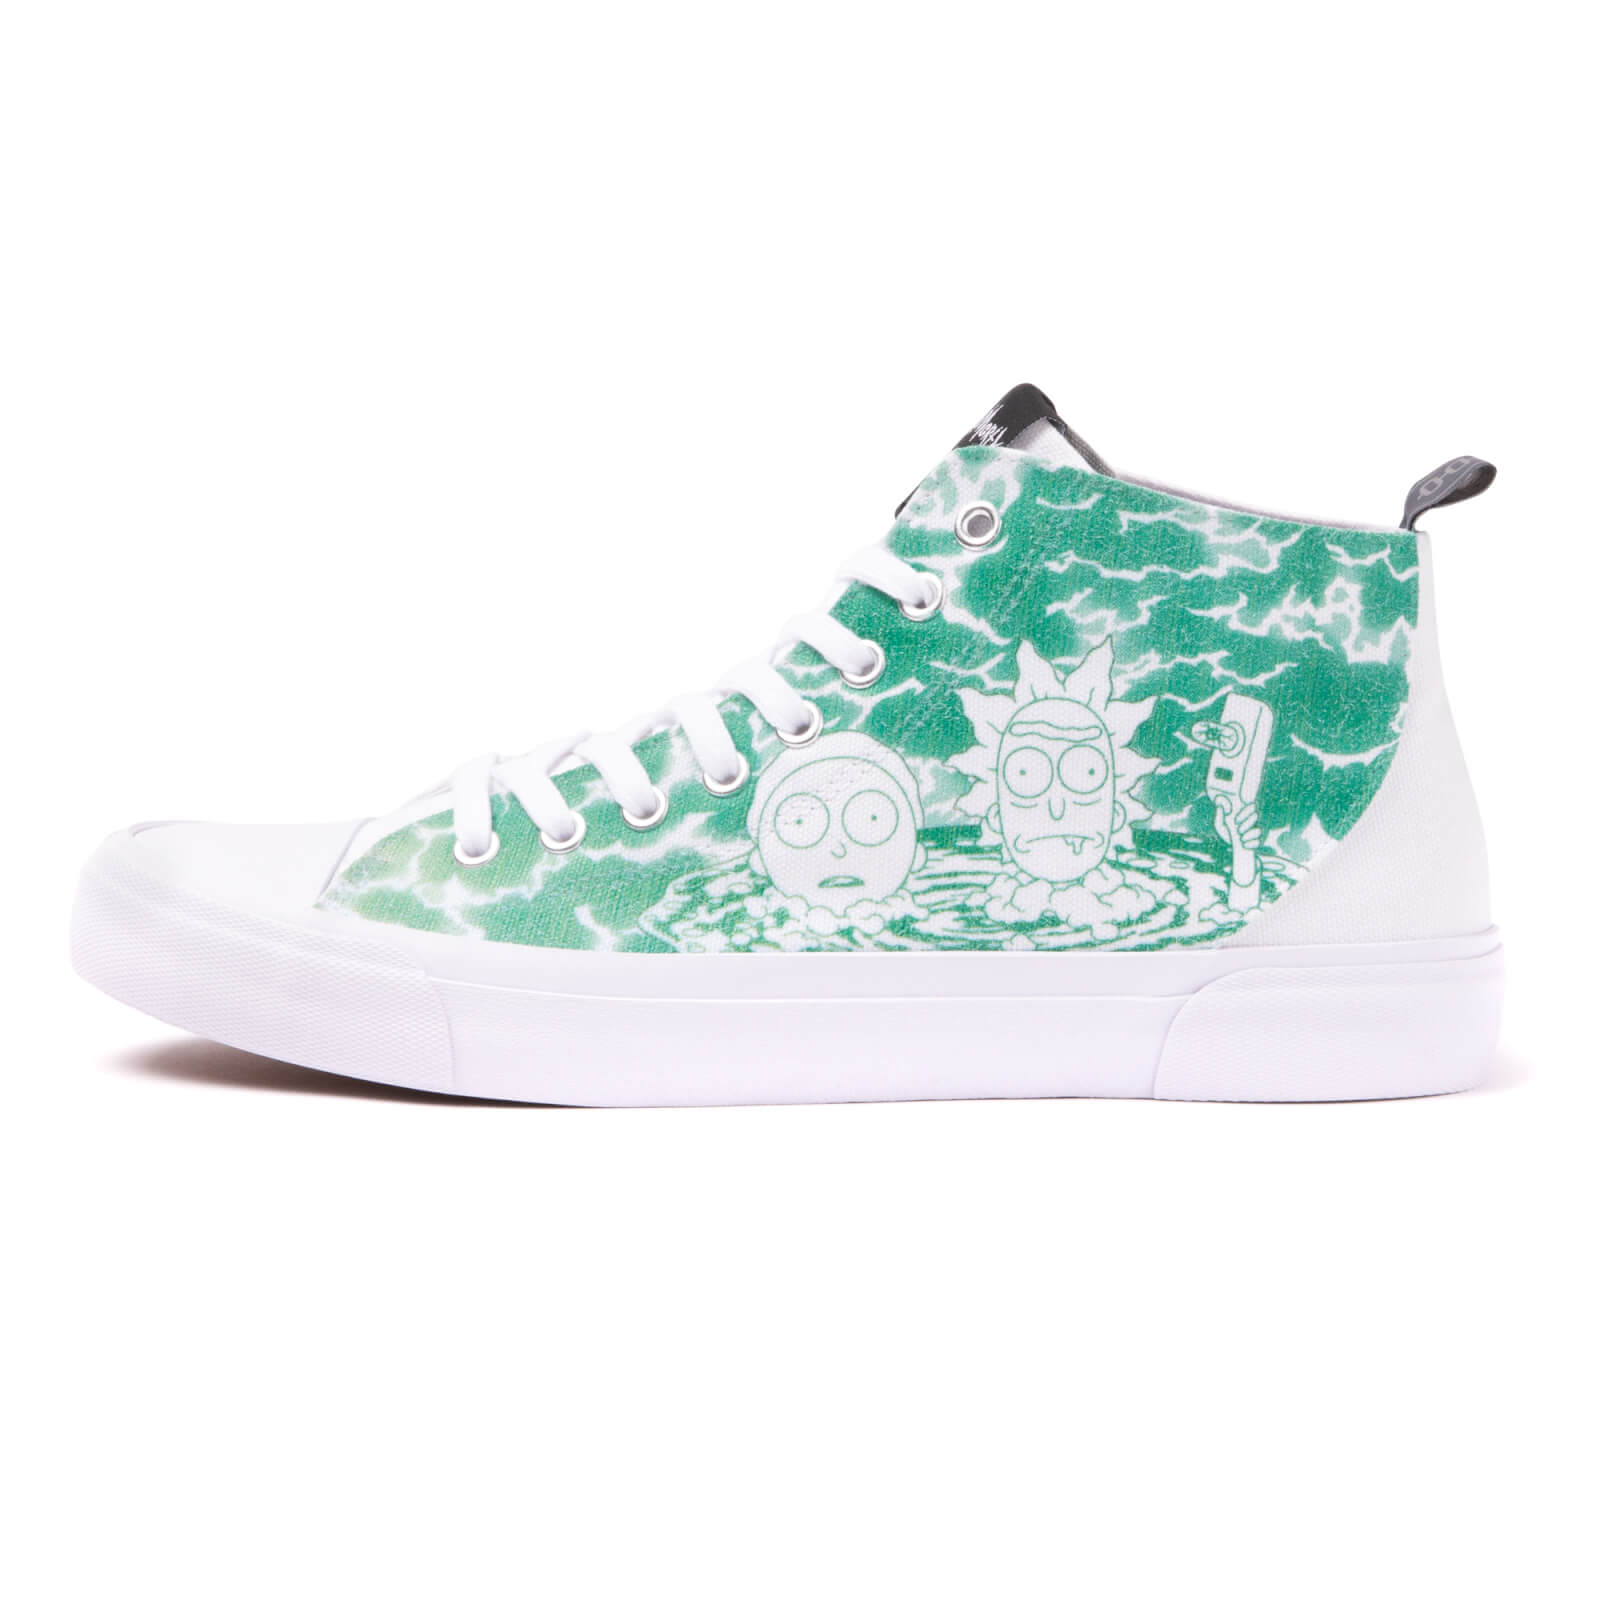 Akedo x Rick & Morty - Chaussures Signature Coupe Haute Blanches - UK3 / EU35.5